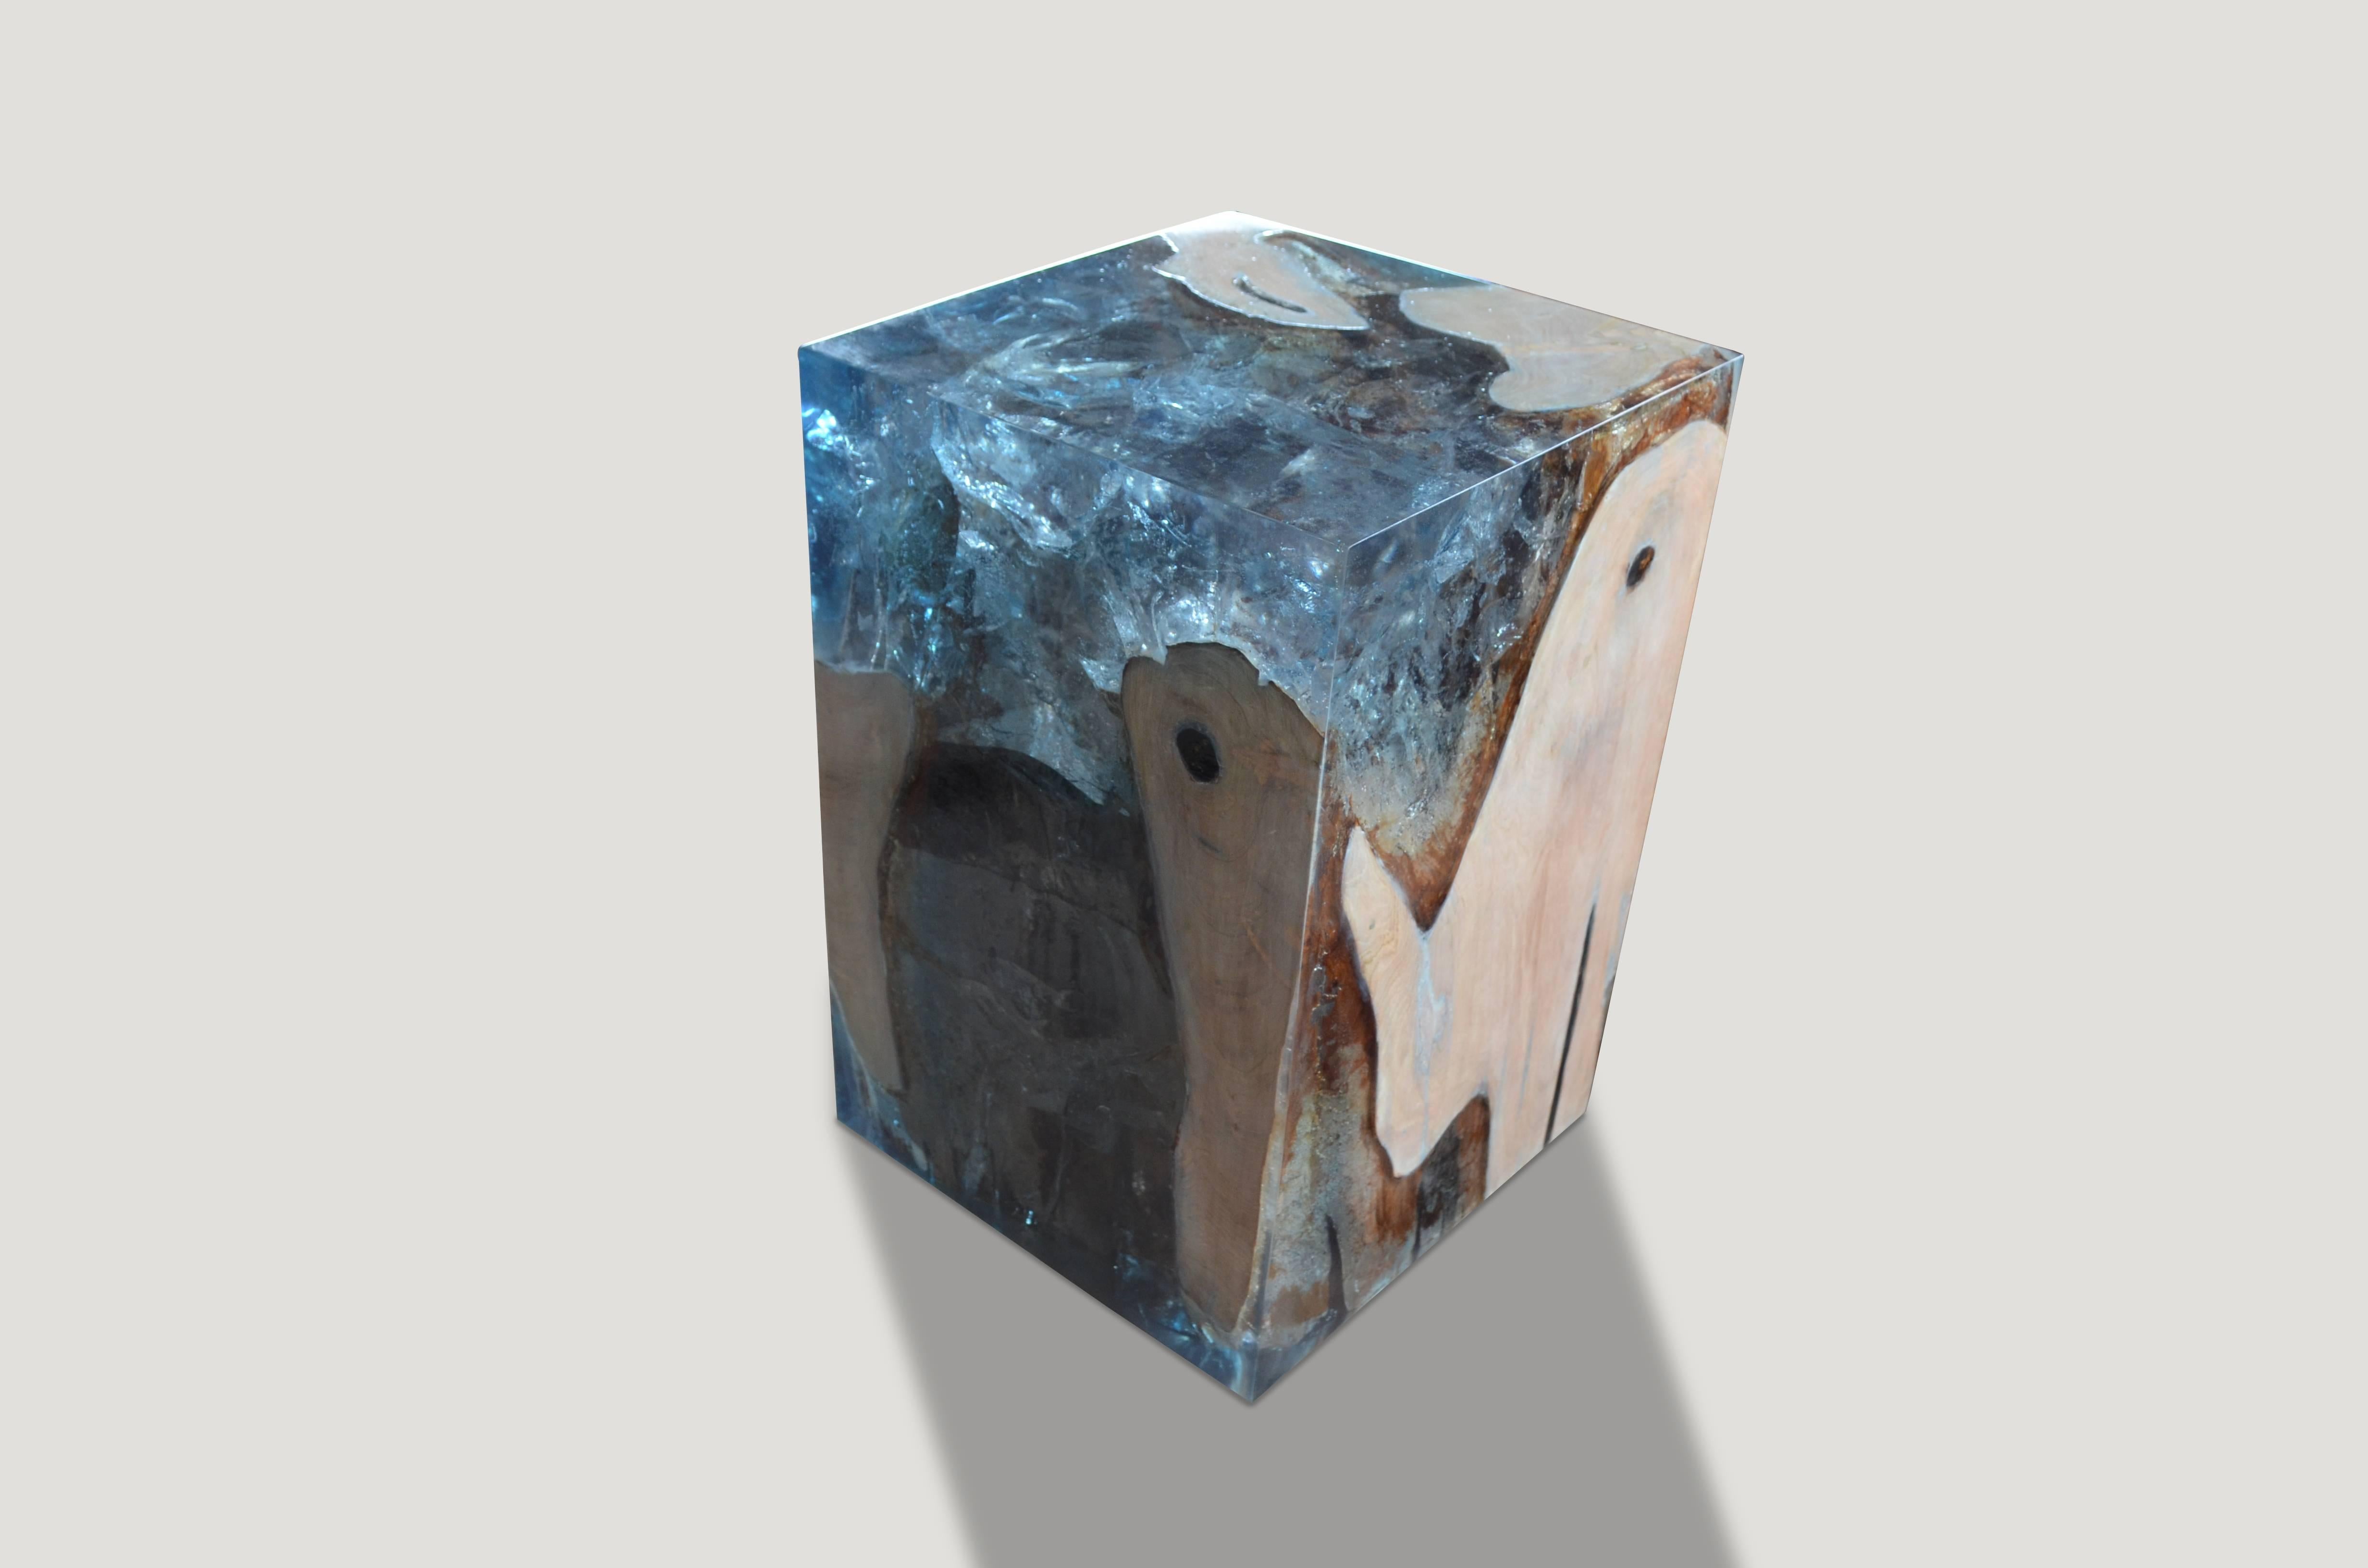 The St. Barts side table is a unique variation of the teak and cracked resin cube. Ice blue or aqua resin is cracked and added into the natural grooves of the bleached teak wood, sanded and finished with a high polish.

The St. Barts Collection